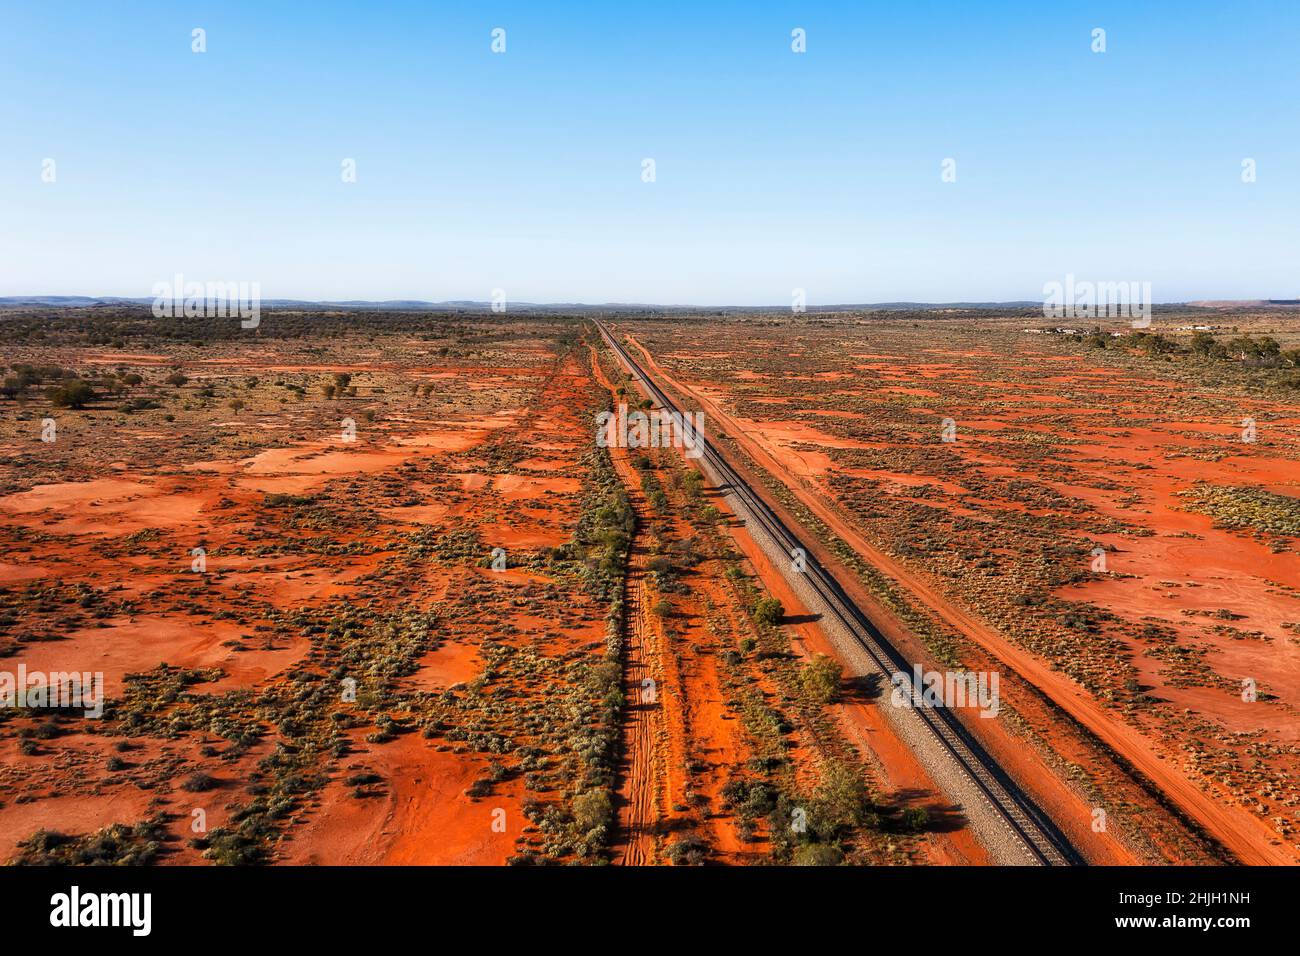 Extreme terrain of remote red soil outback in Australia around Broken hill and railway track - aerial landscape. Stock Photo